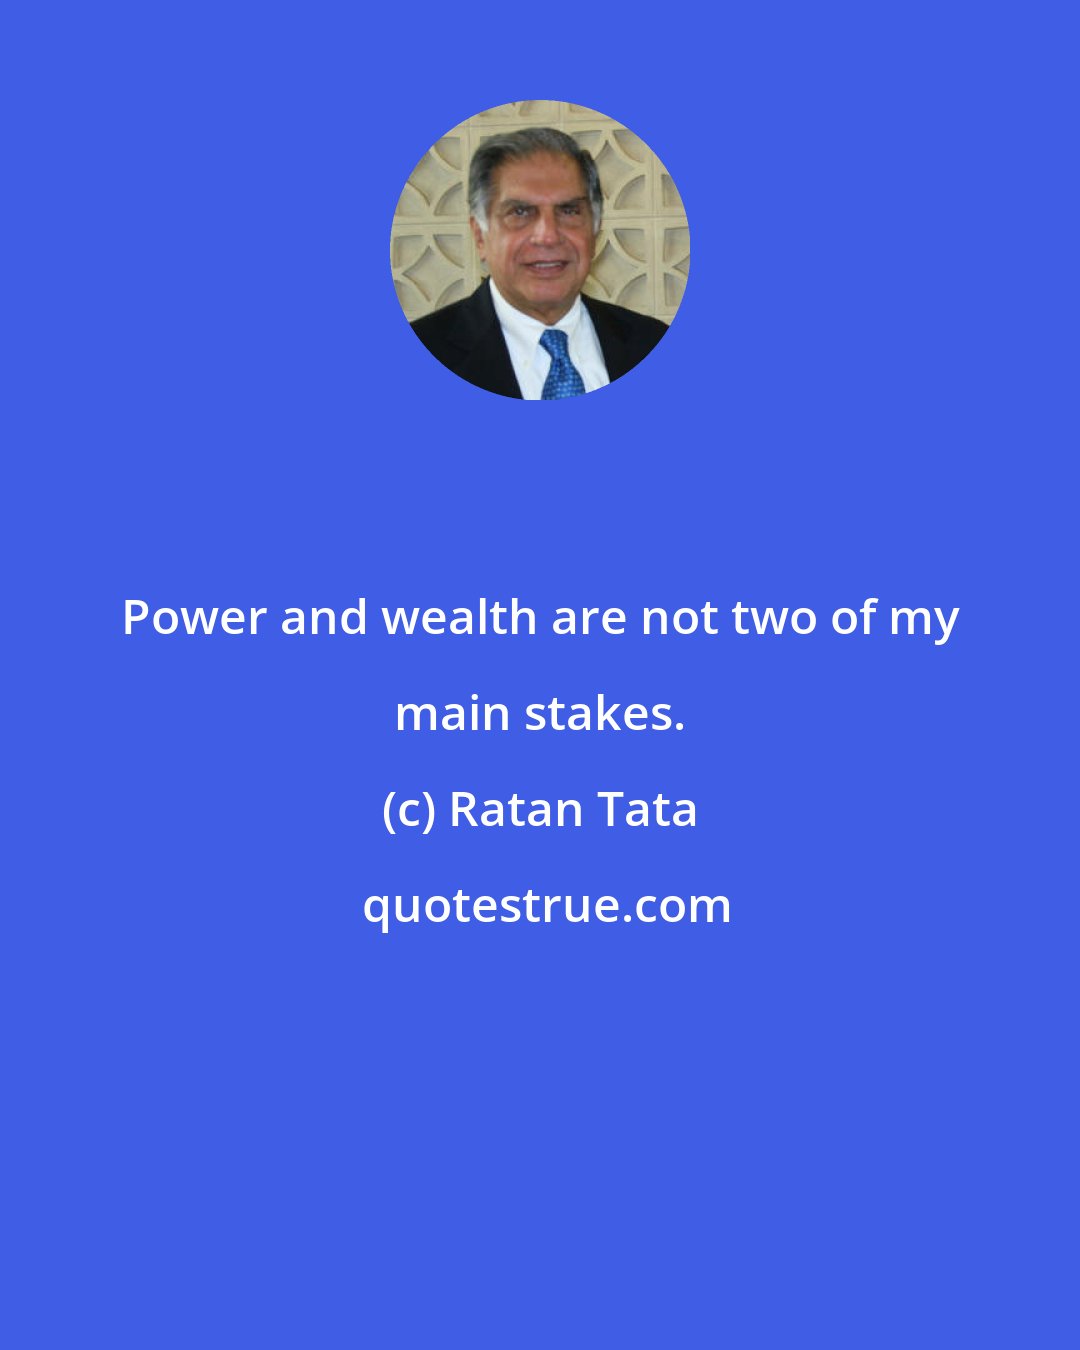 Ratan Tata: Power and wealth are not two of my main stakes.